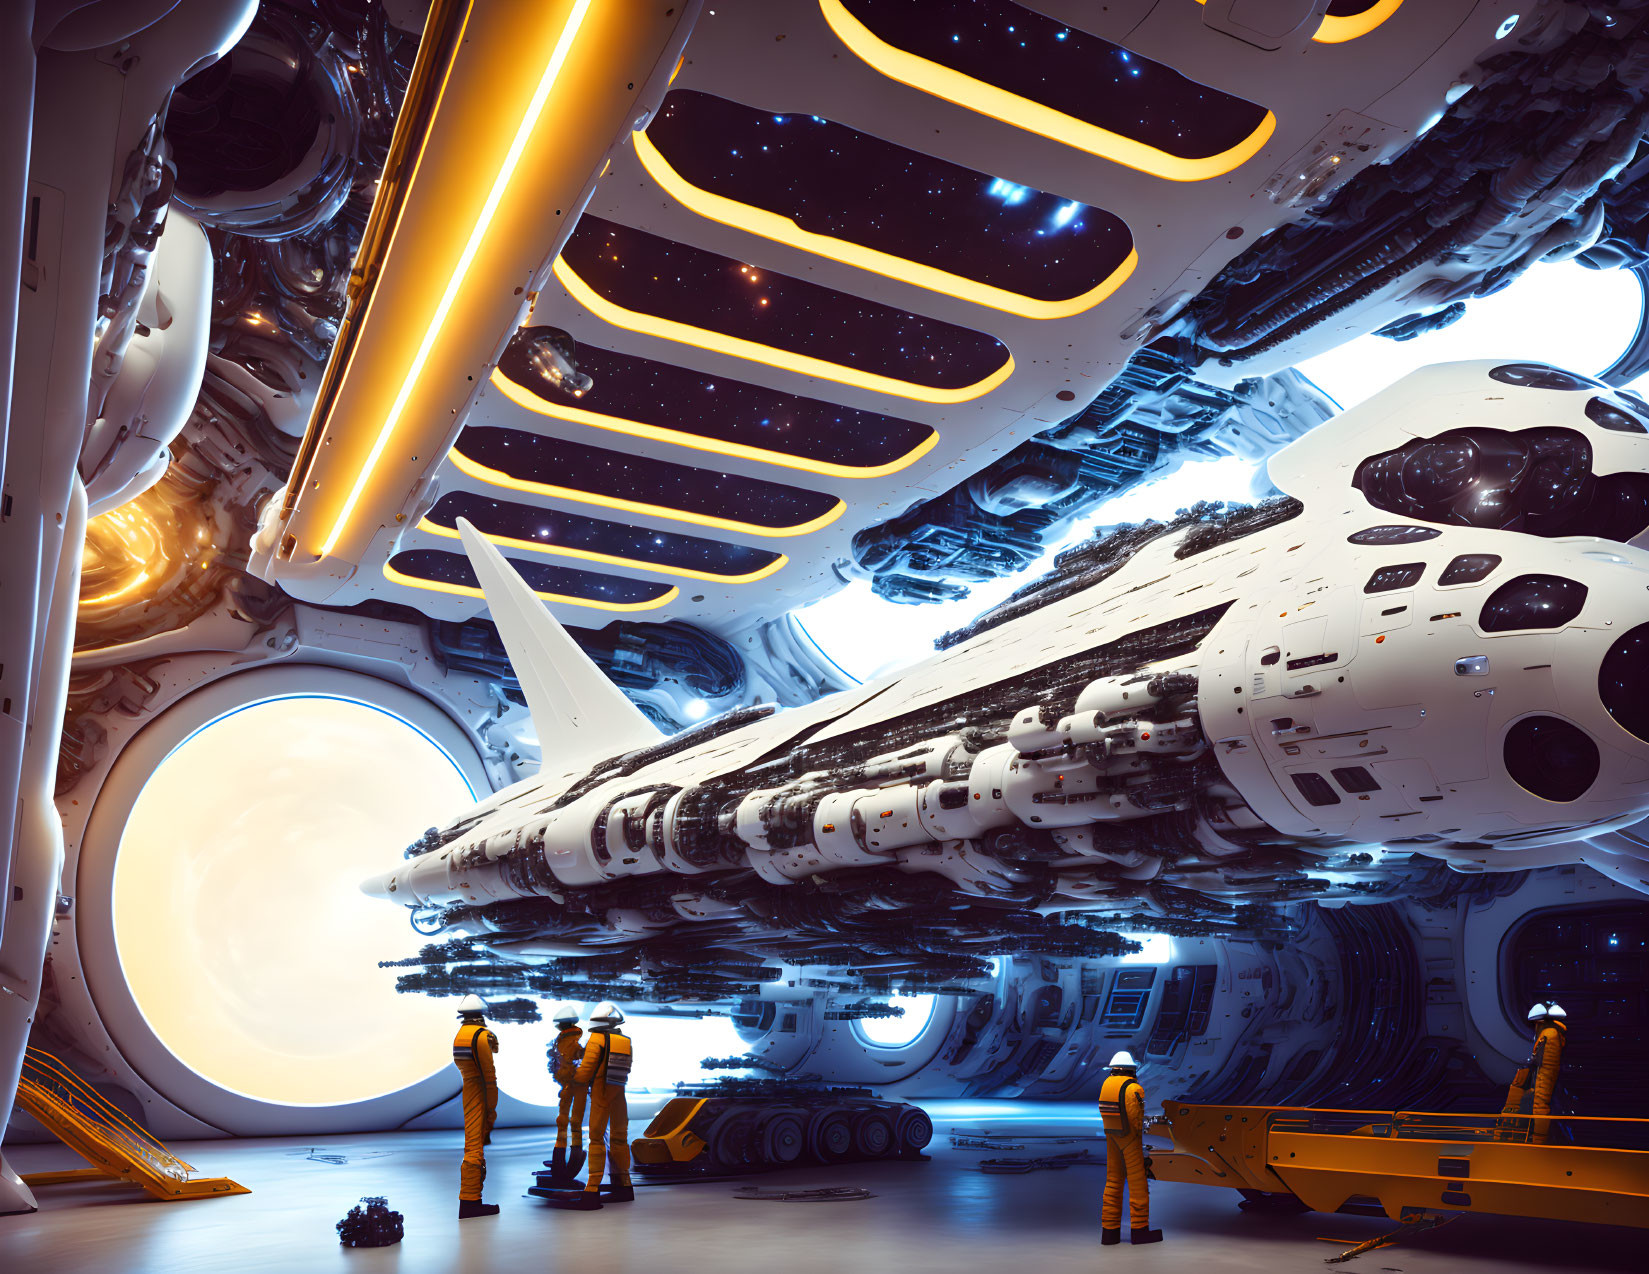 Futuristic spaceship in high-tech hangar with figures in yellow suits